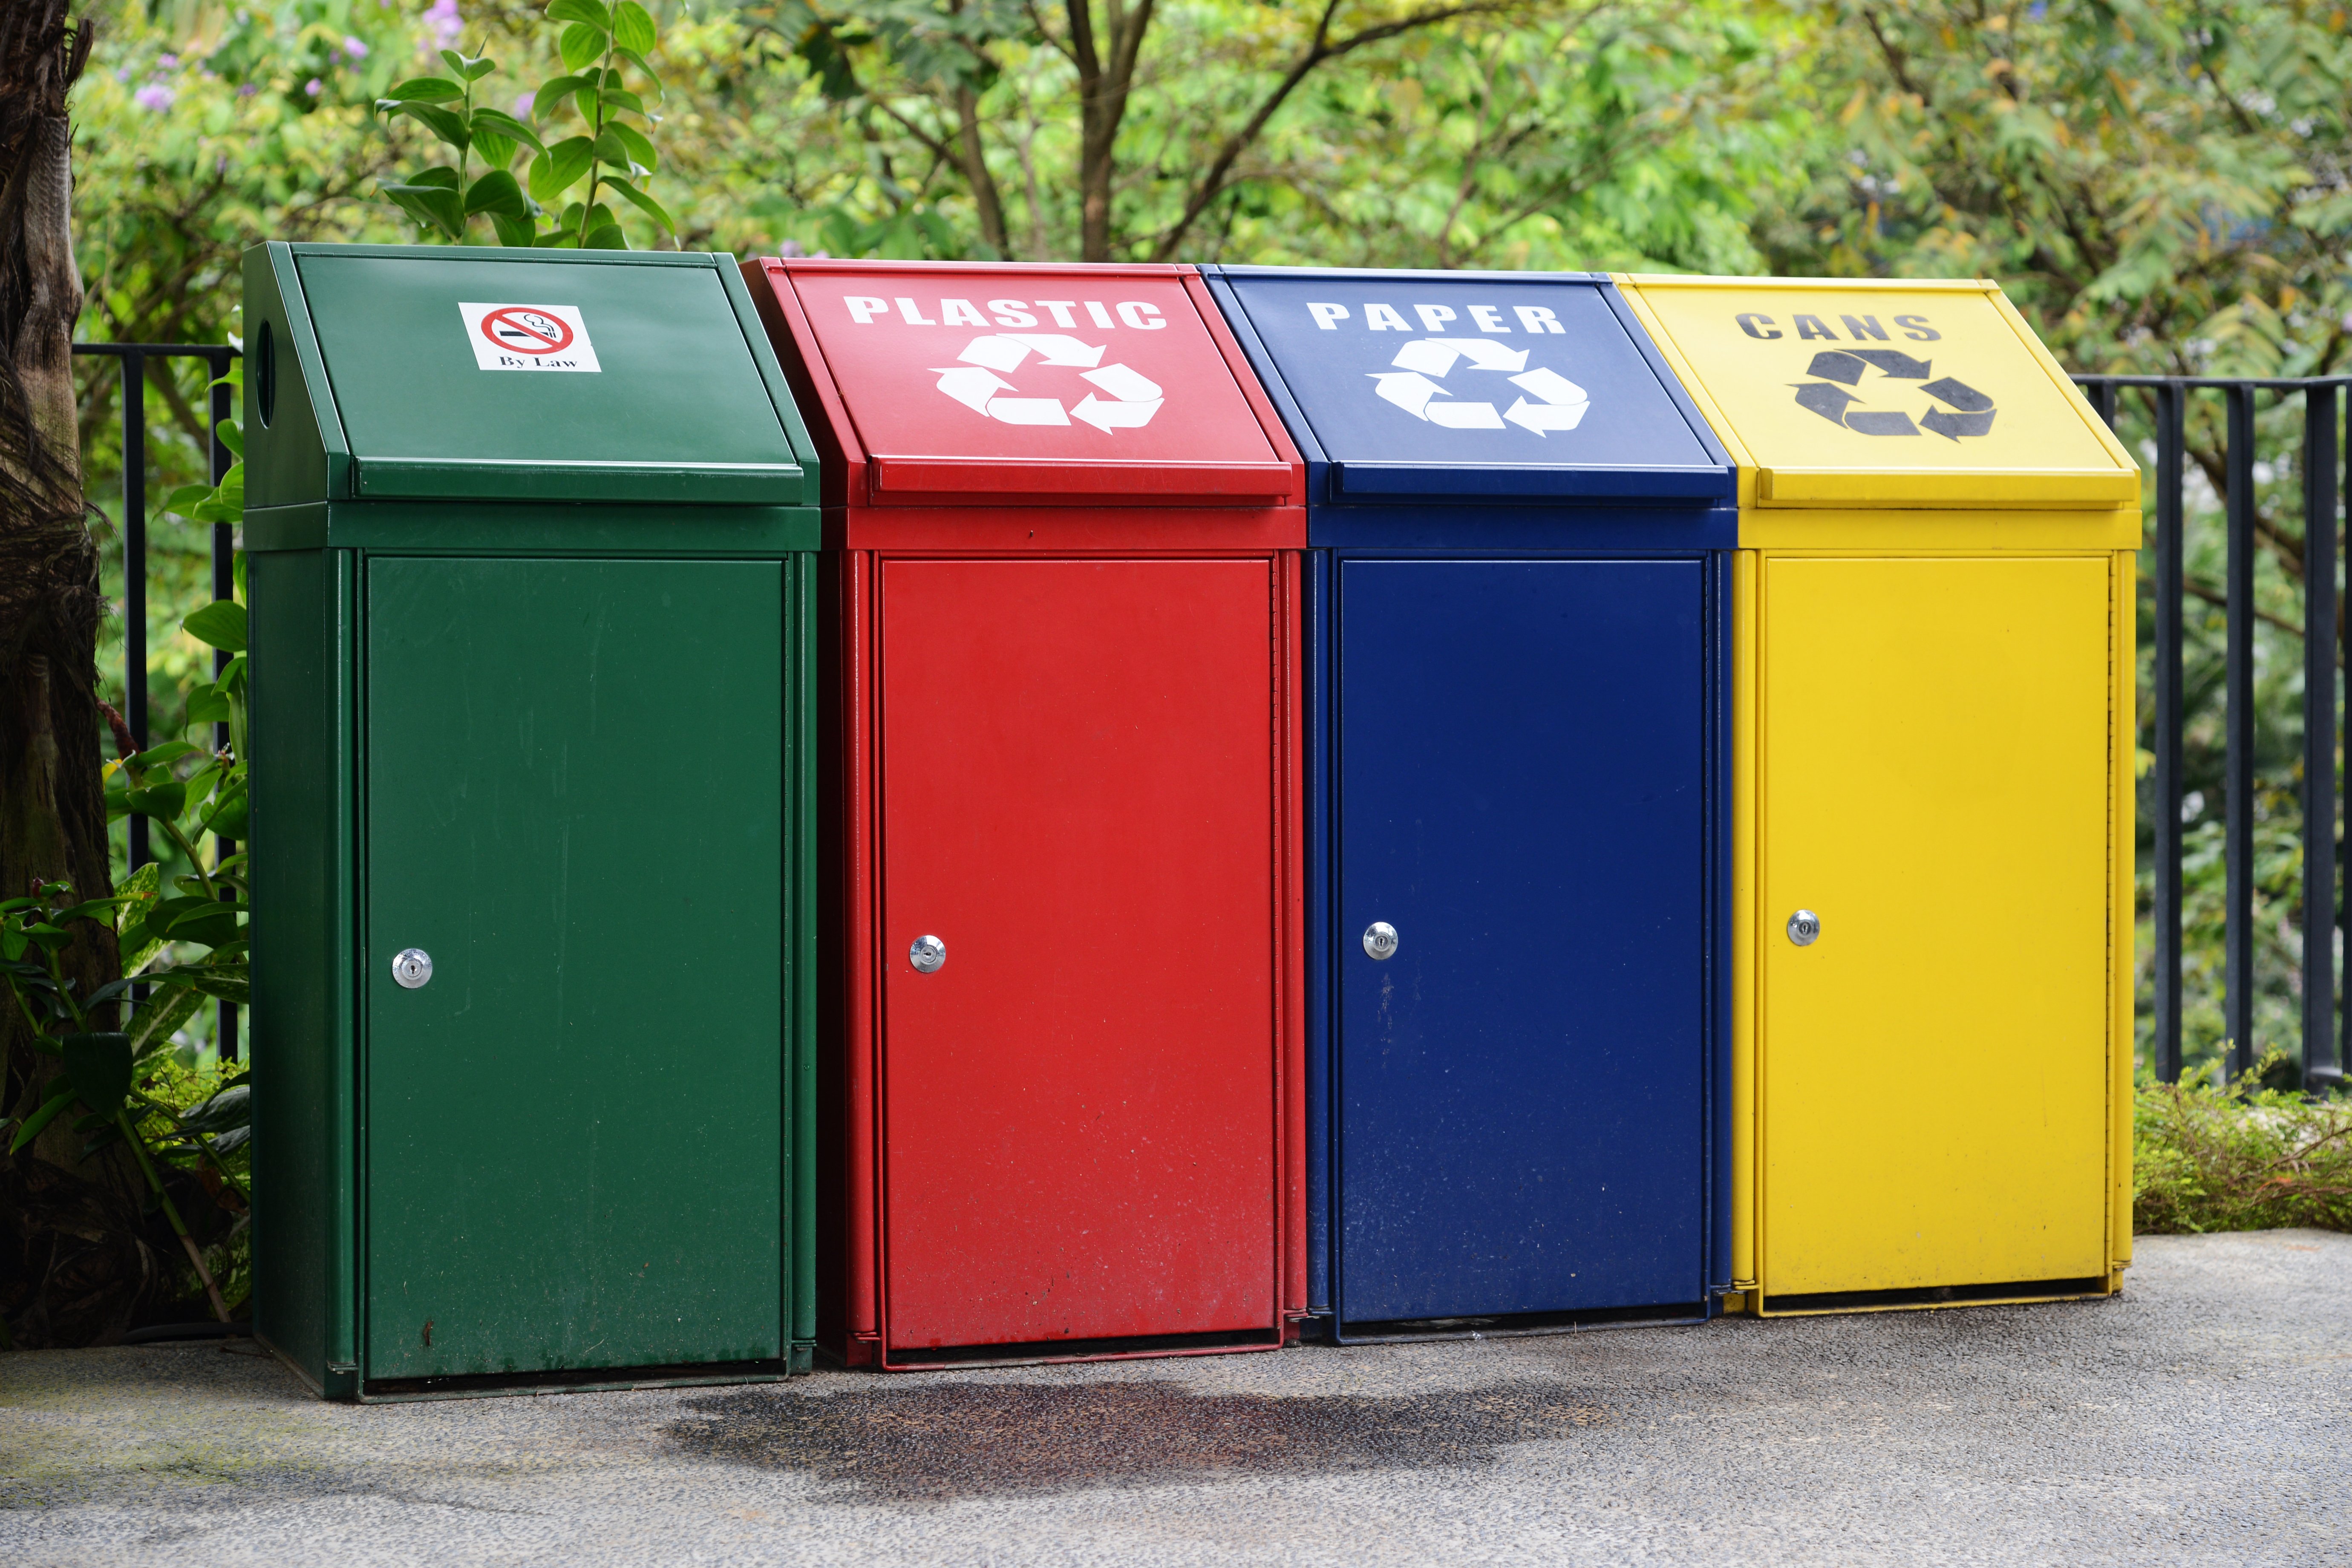 recycling bins: reducing waste in holiday